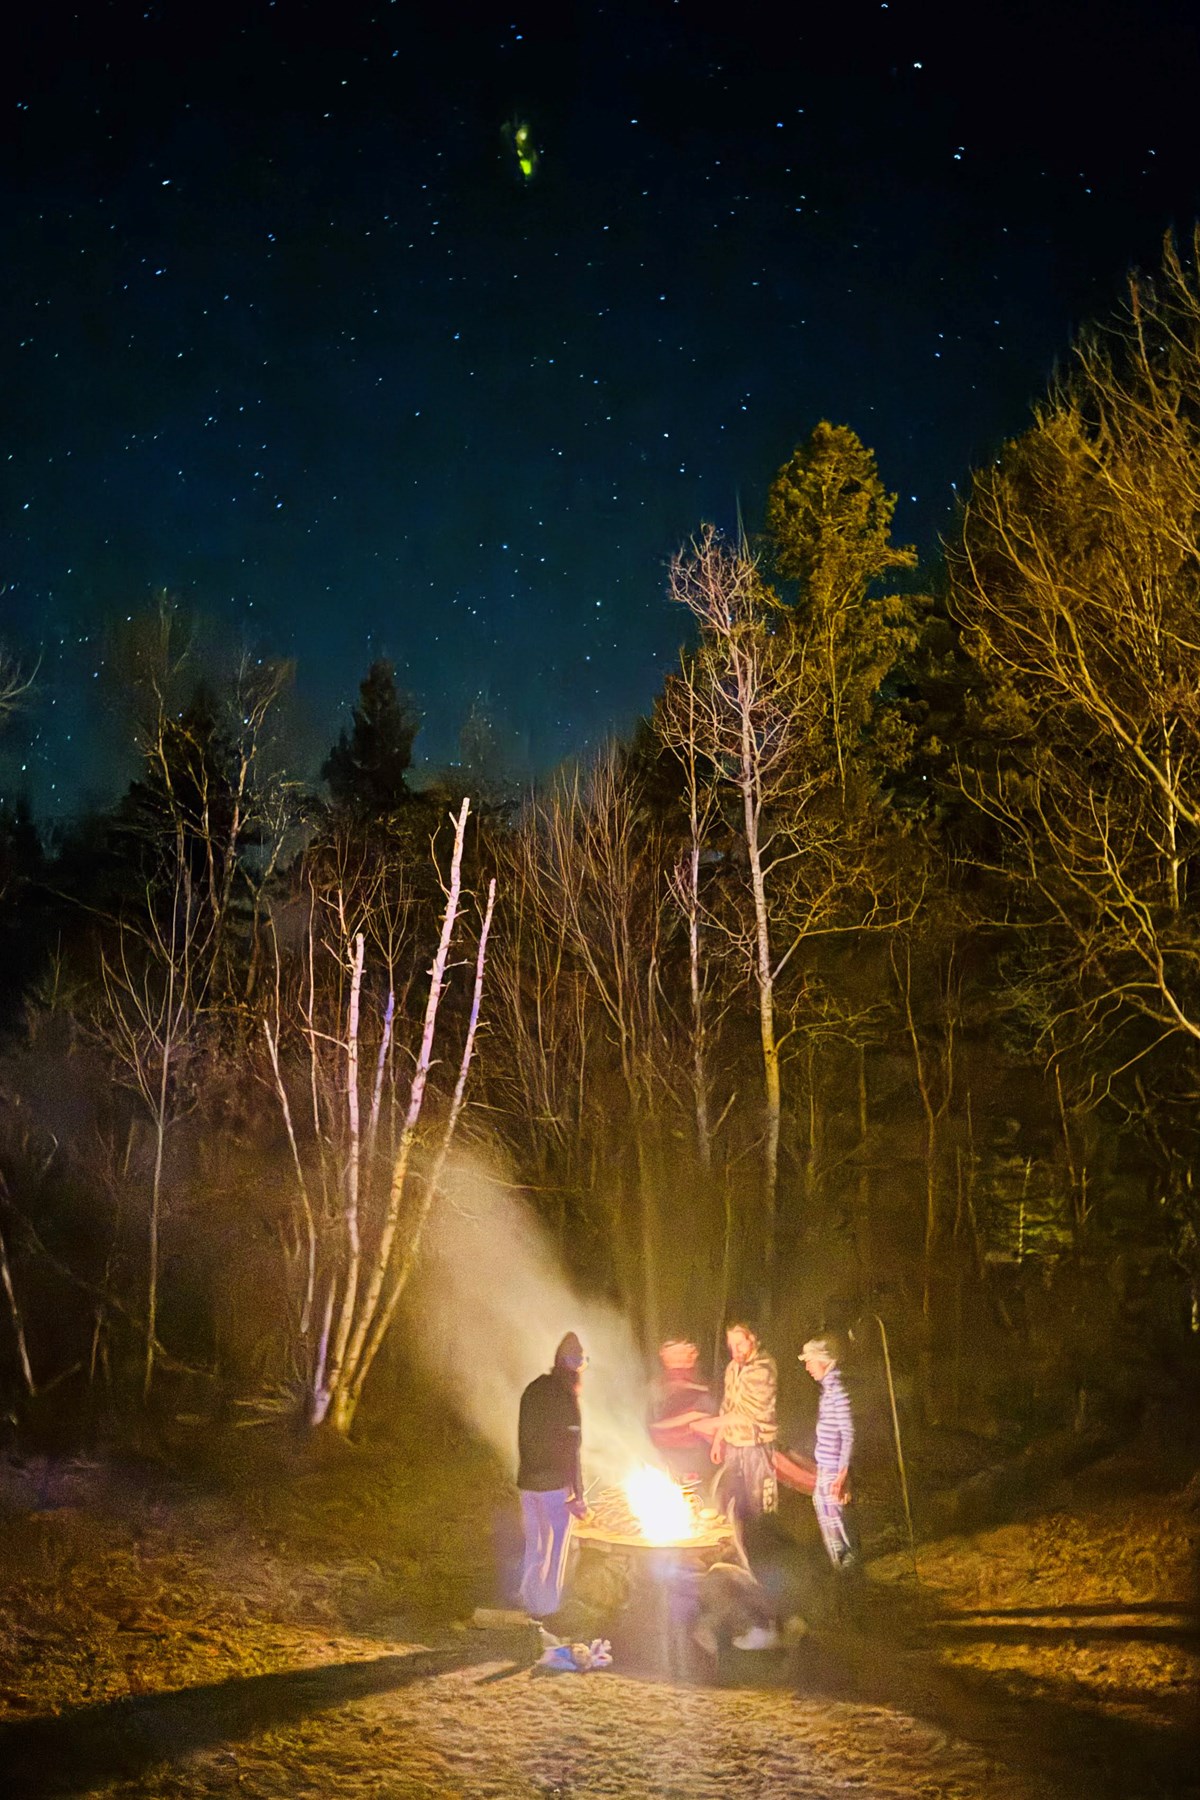 Four people stand around a campfire at night under the stars.